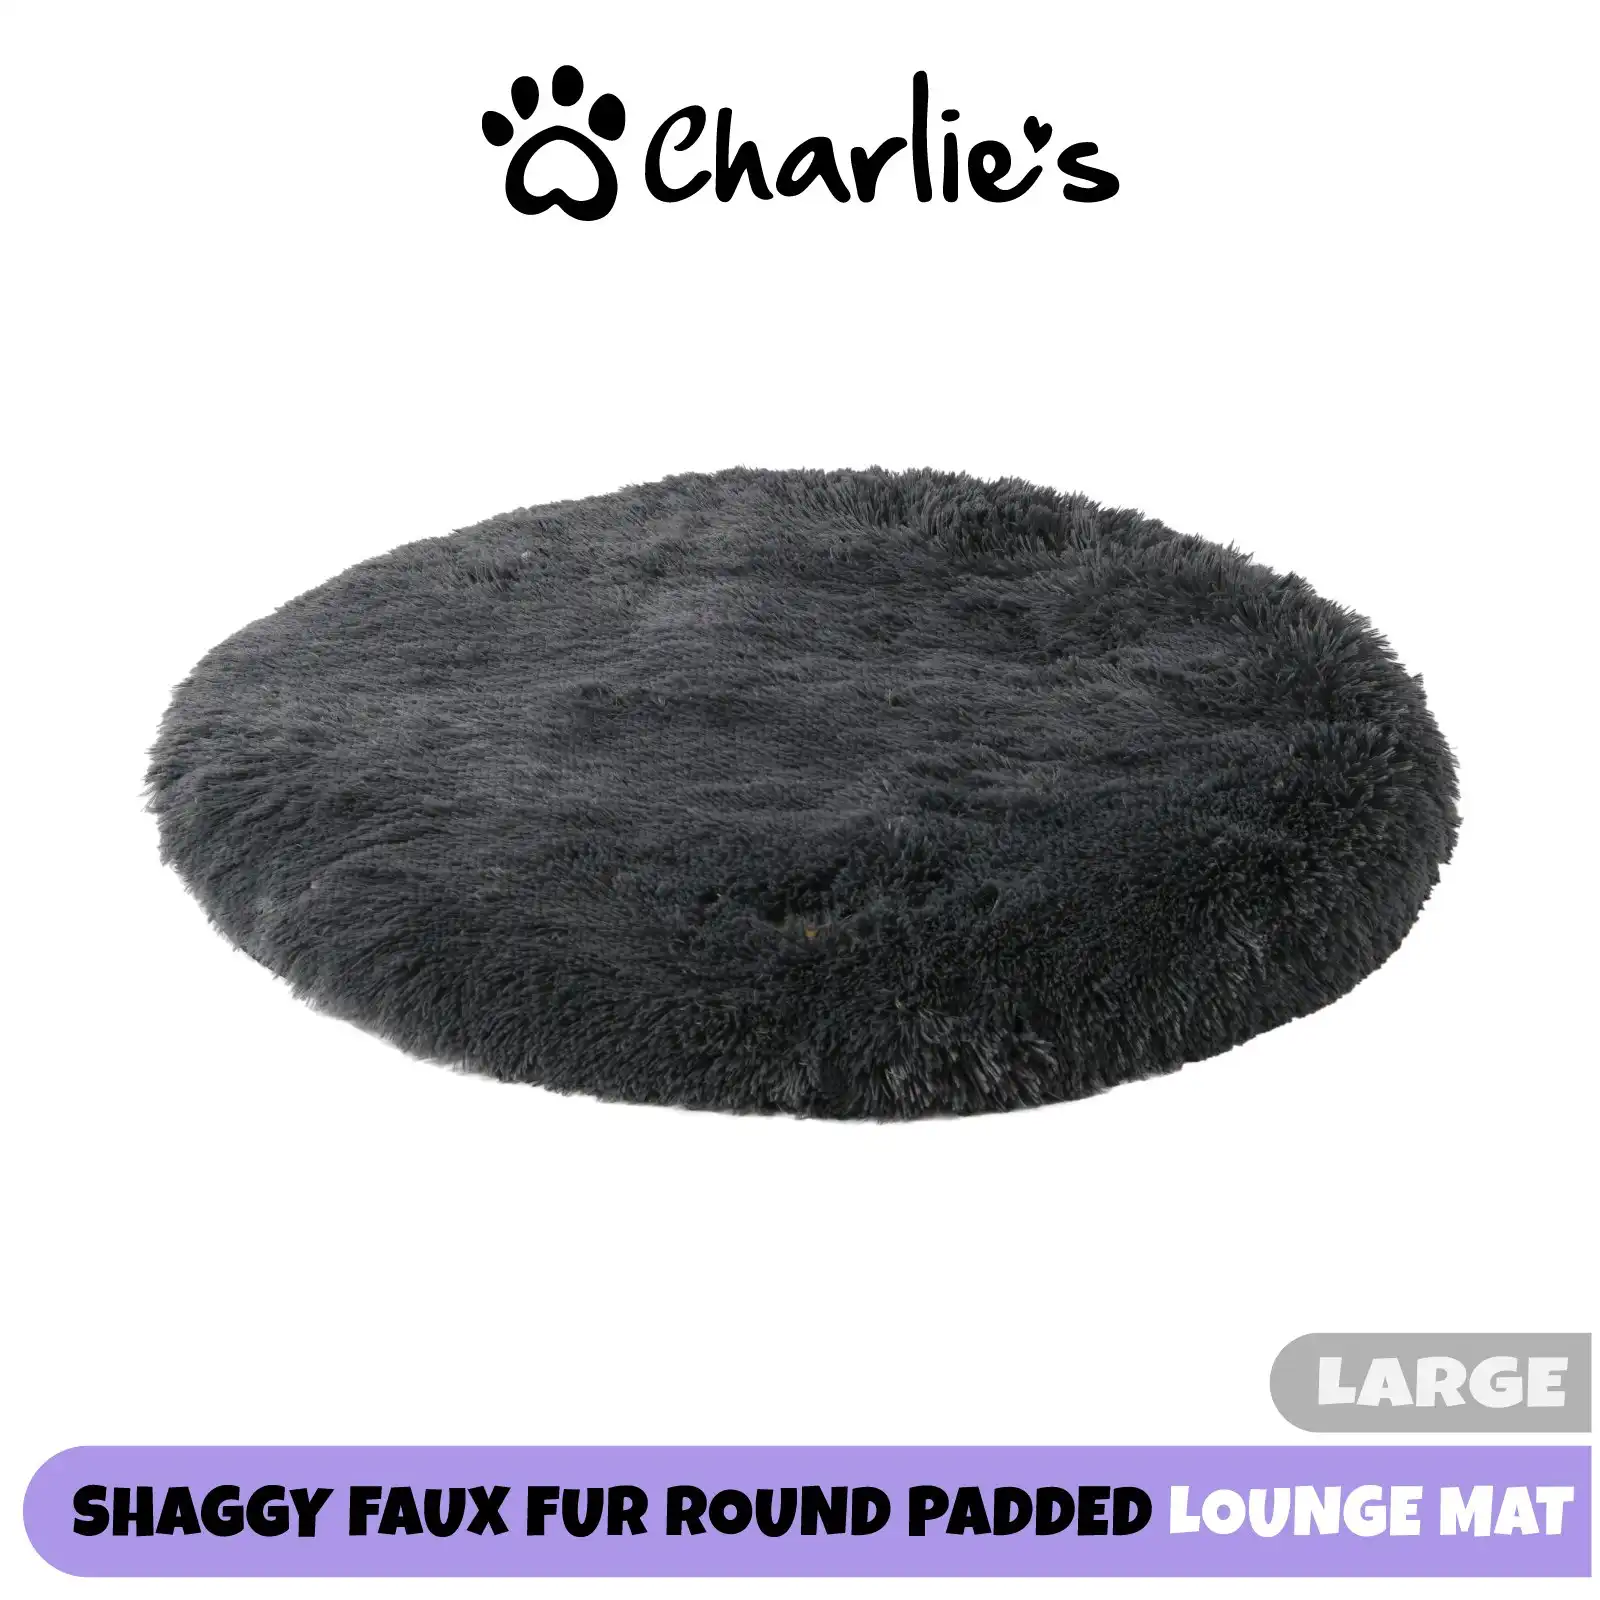 Charlie's Shaggy Faux Fur Round Calming Dog Mat Charcoal Large